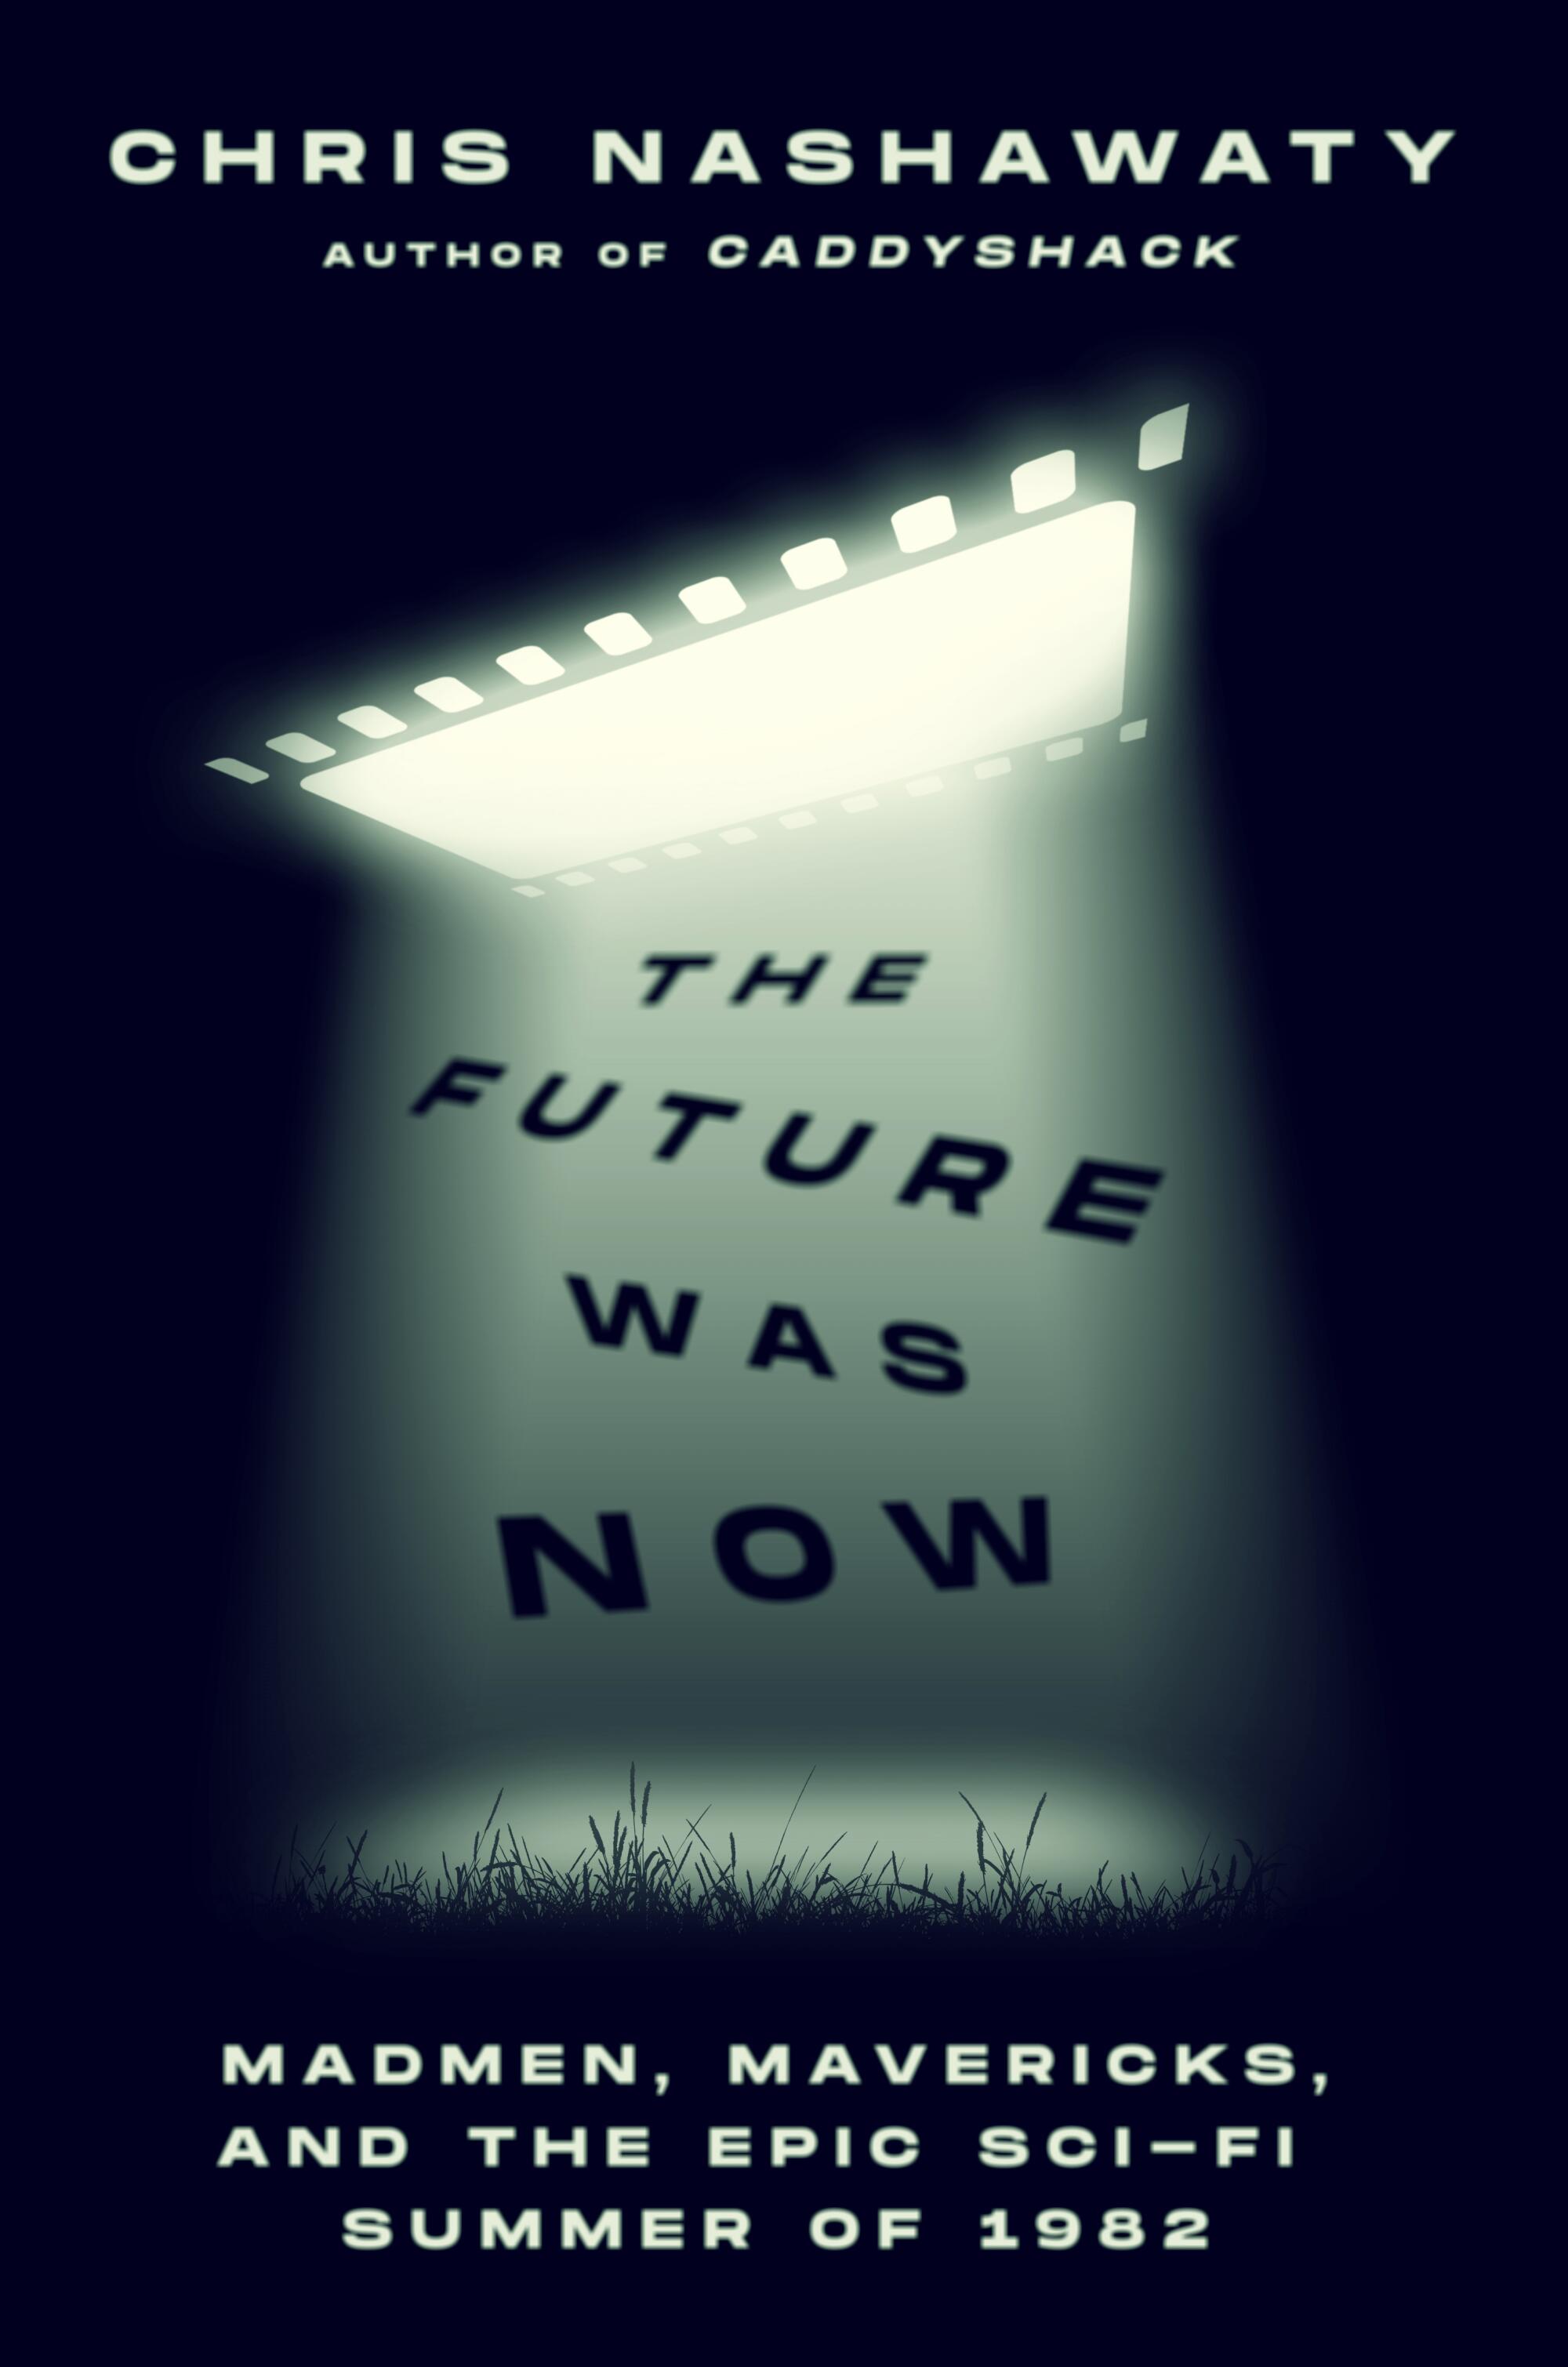 "The Future Was Now" by Chris Nashawaty